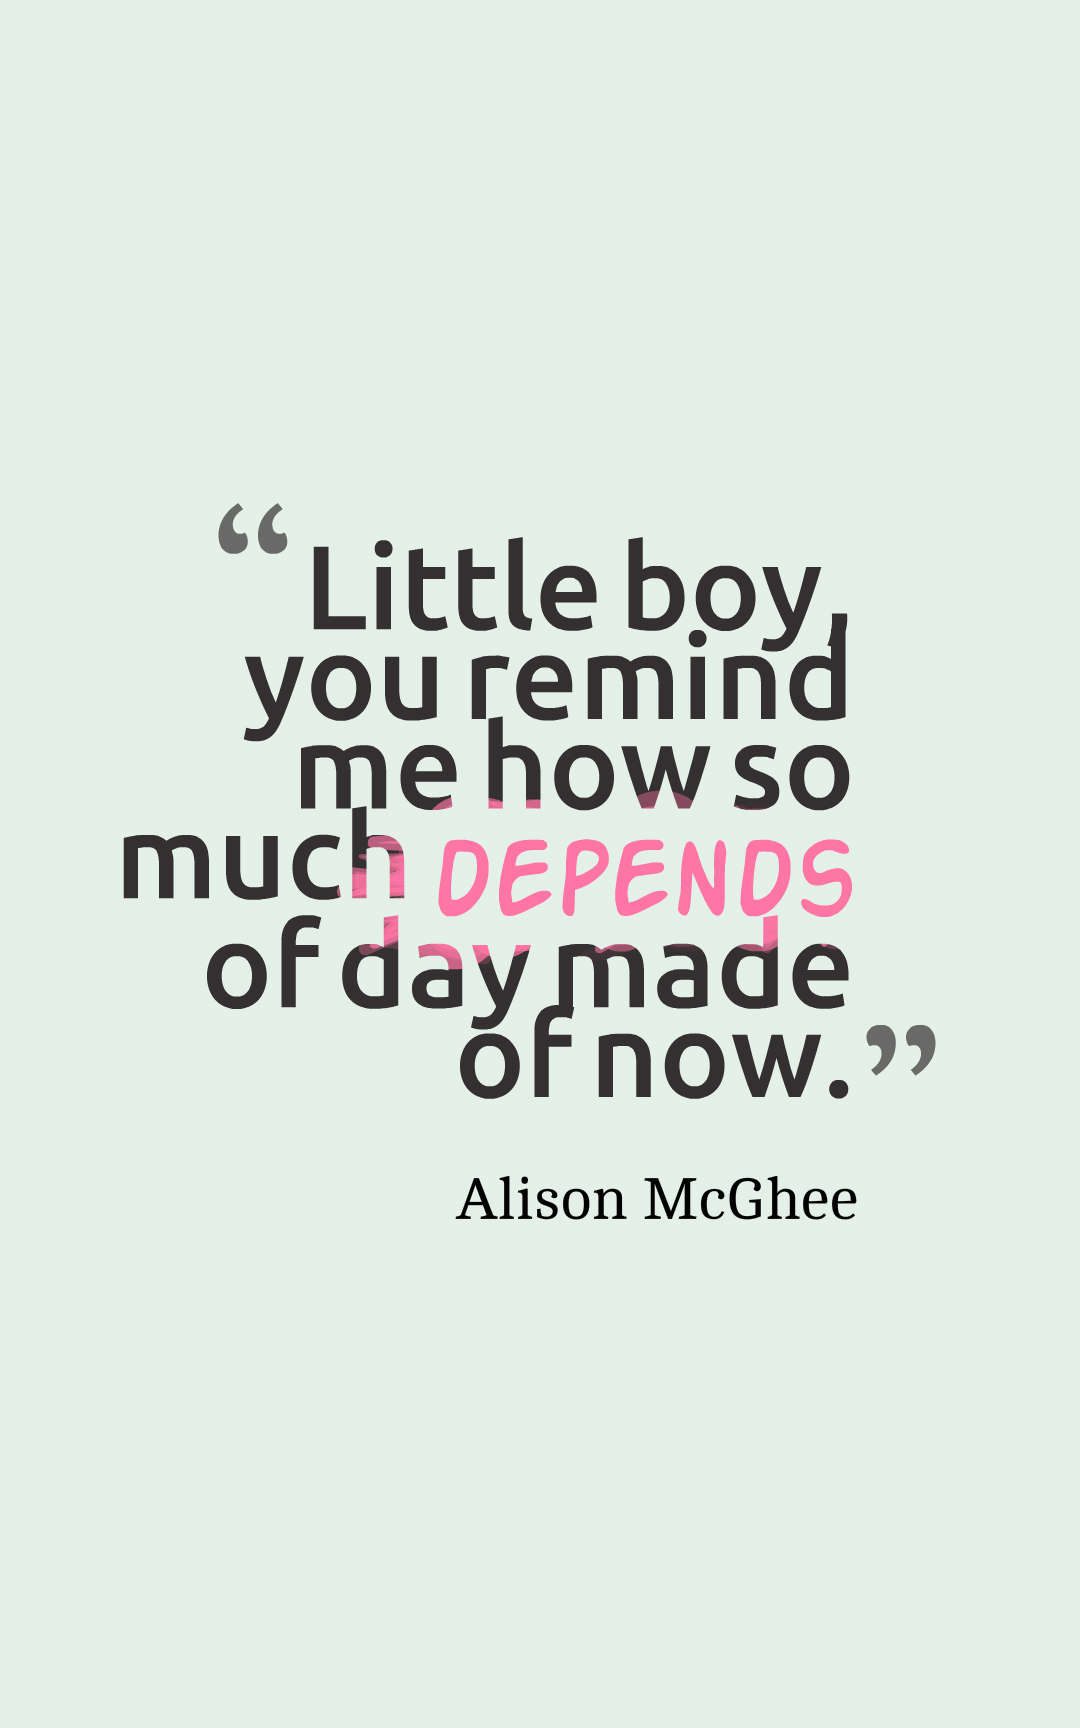 Little boy, you remind me how so much depends of day made of now.